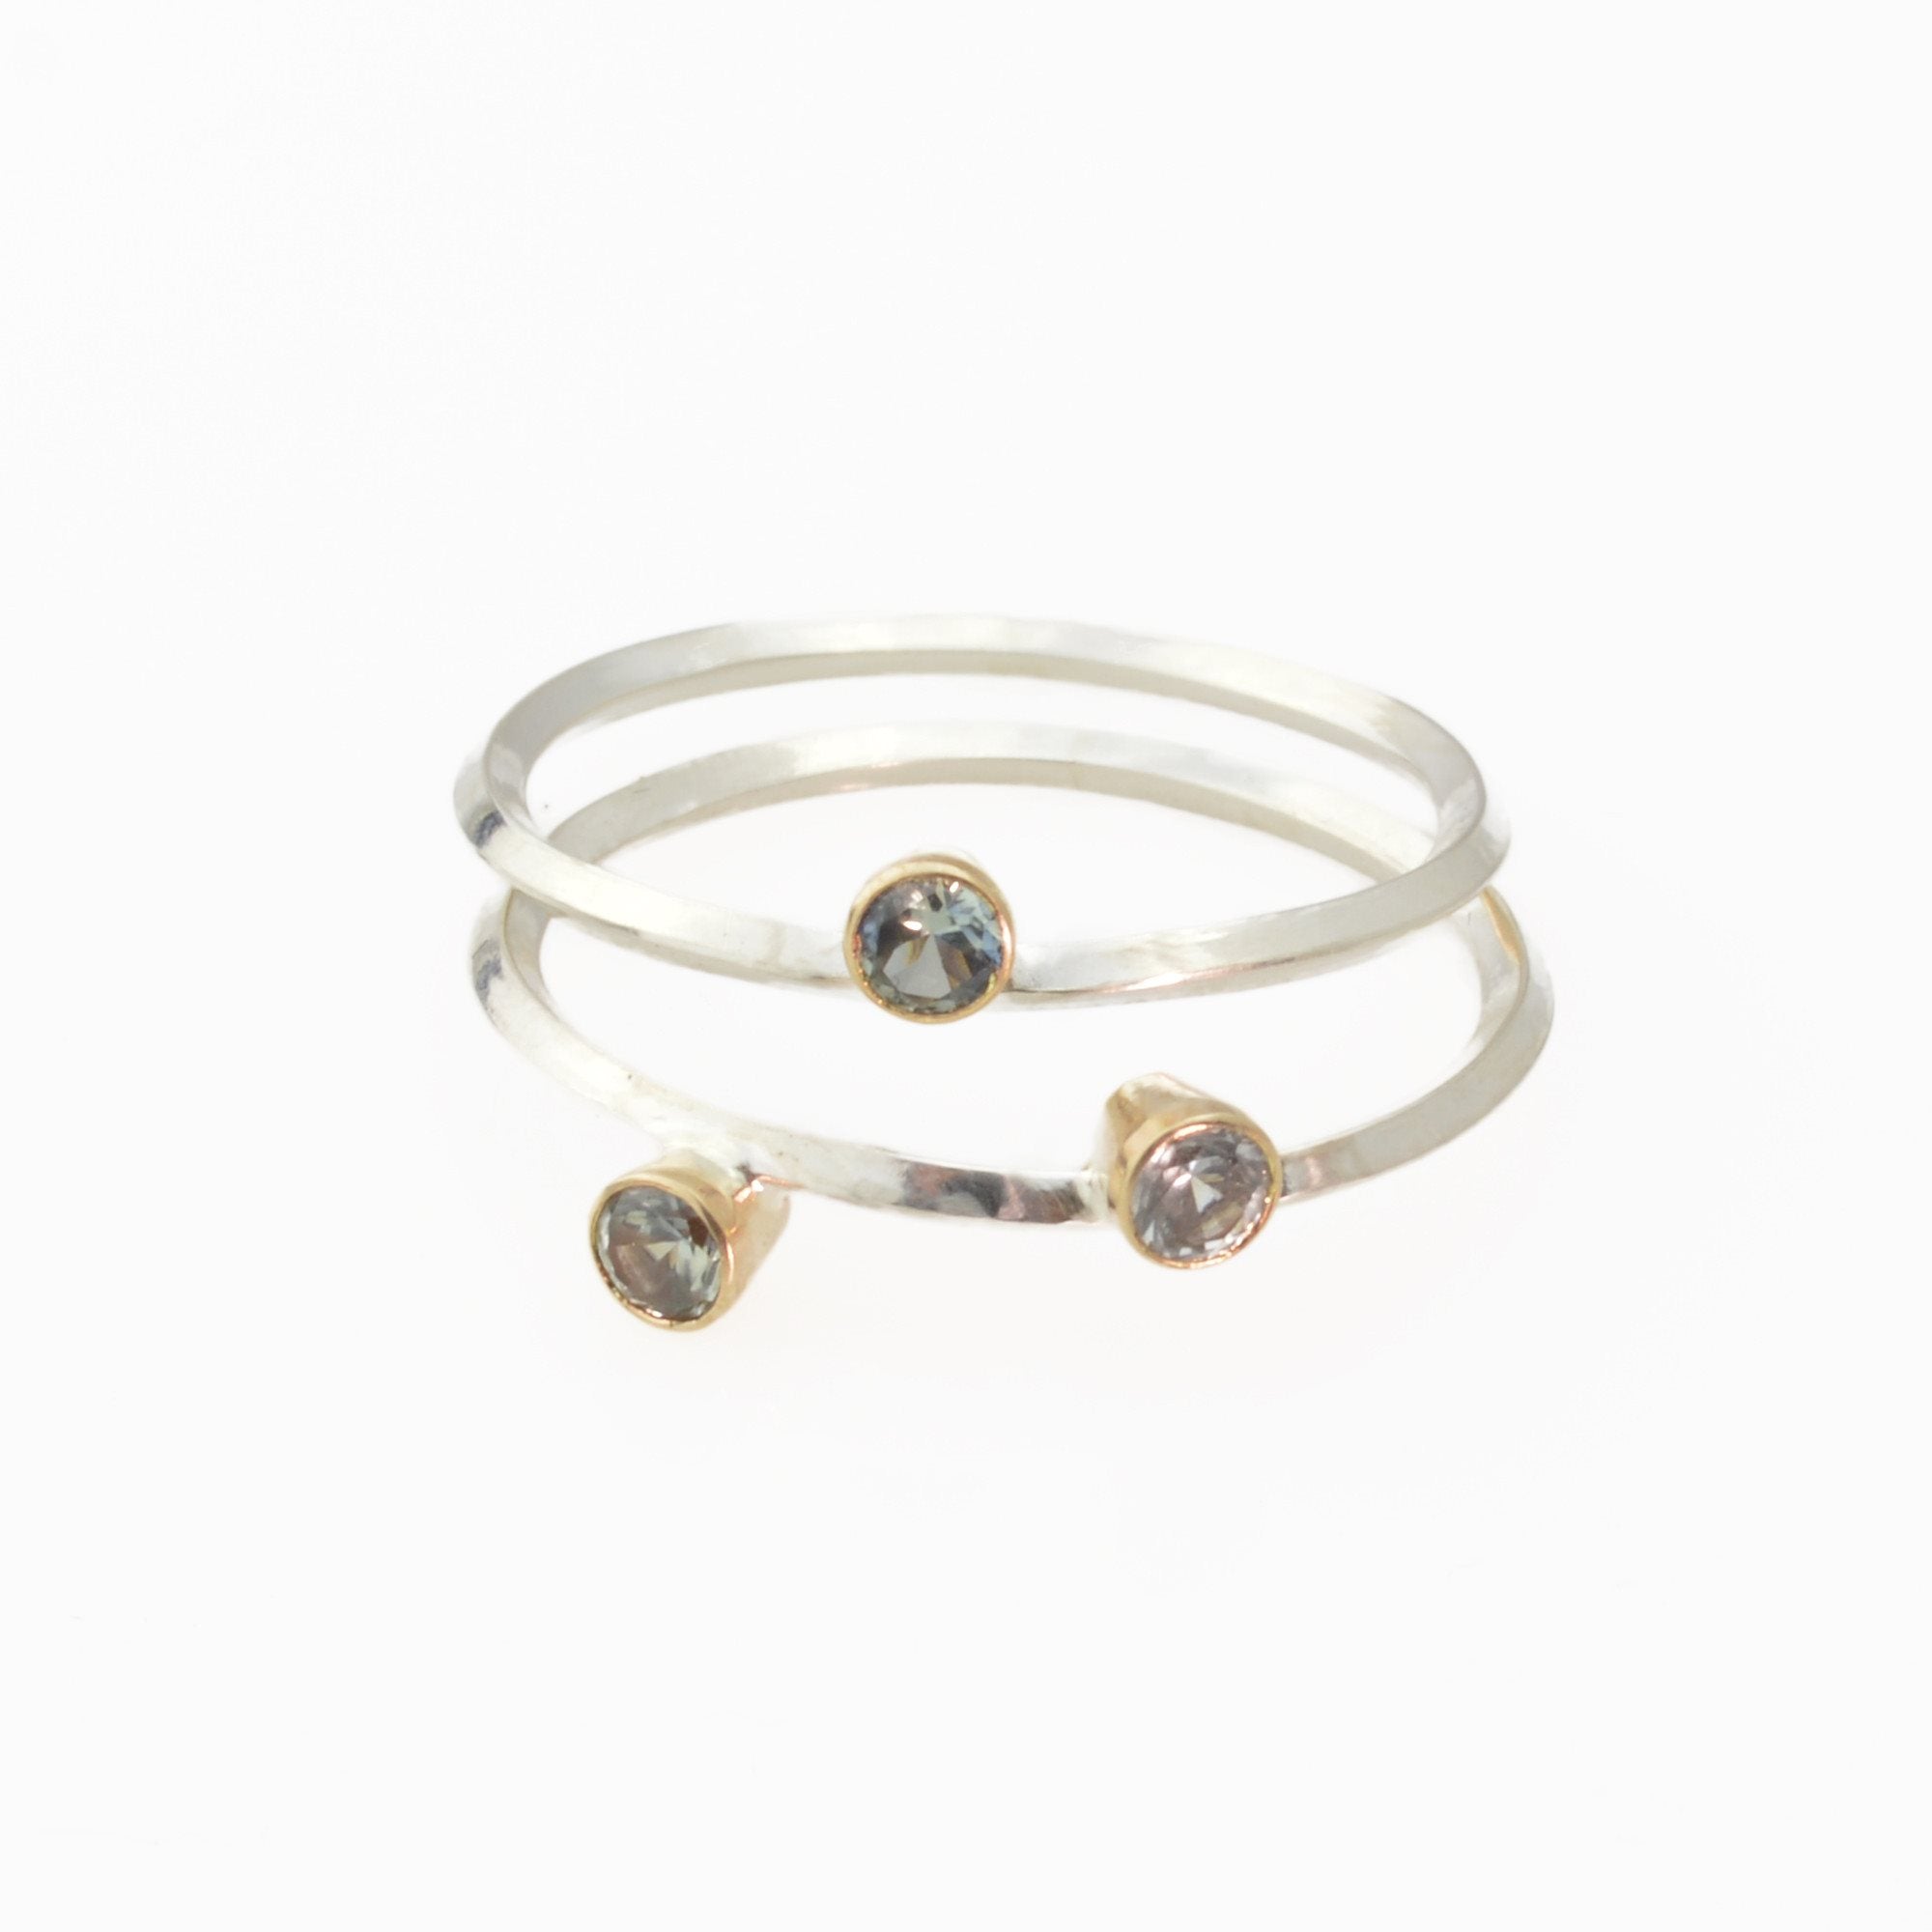 Metropolis Two Montana Sapphires Stacking Ring in 14k Gold and Sterling Silver